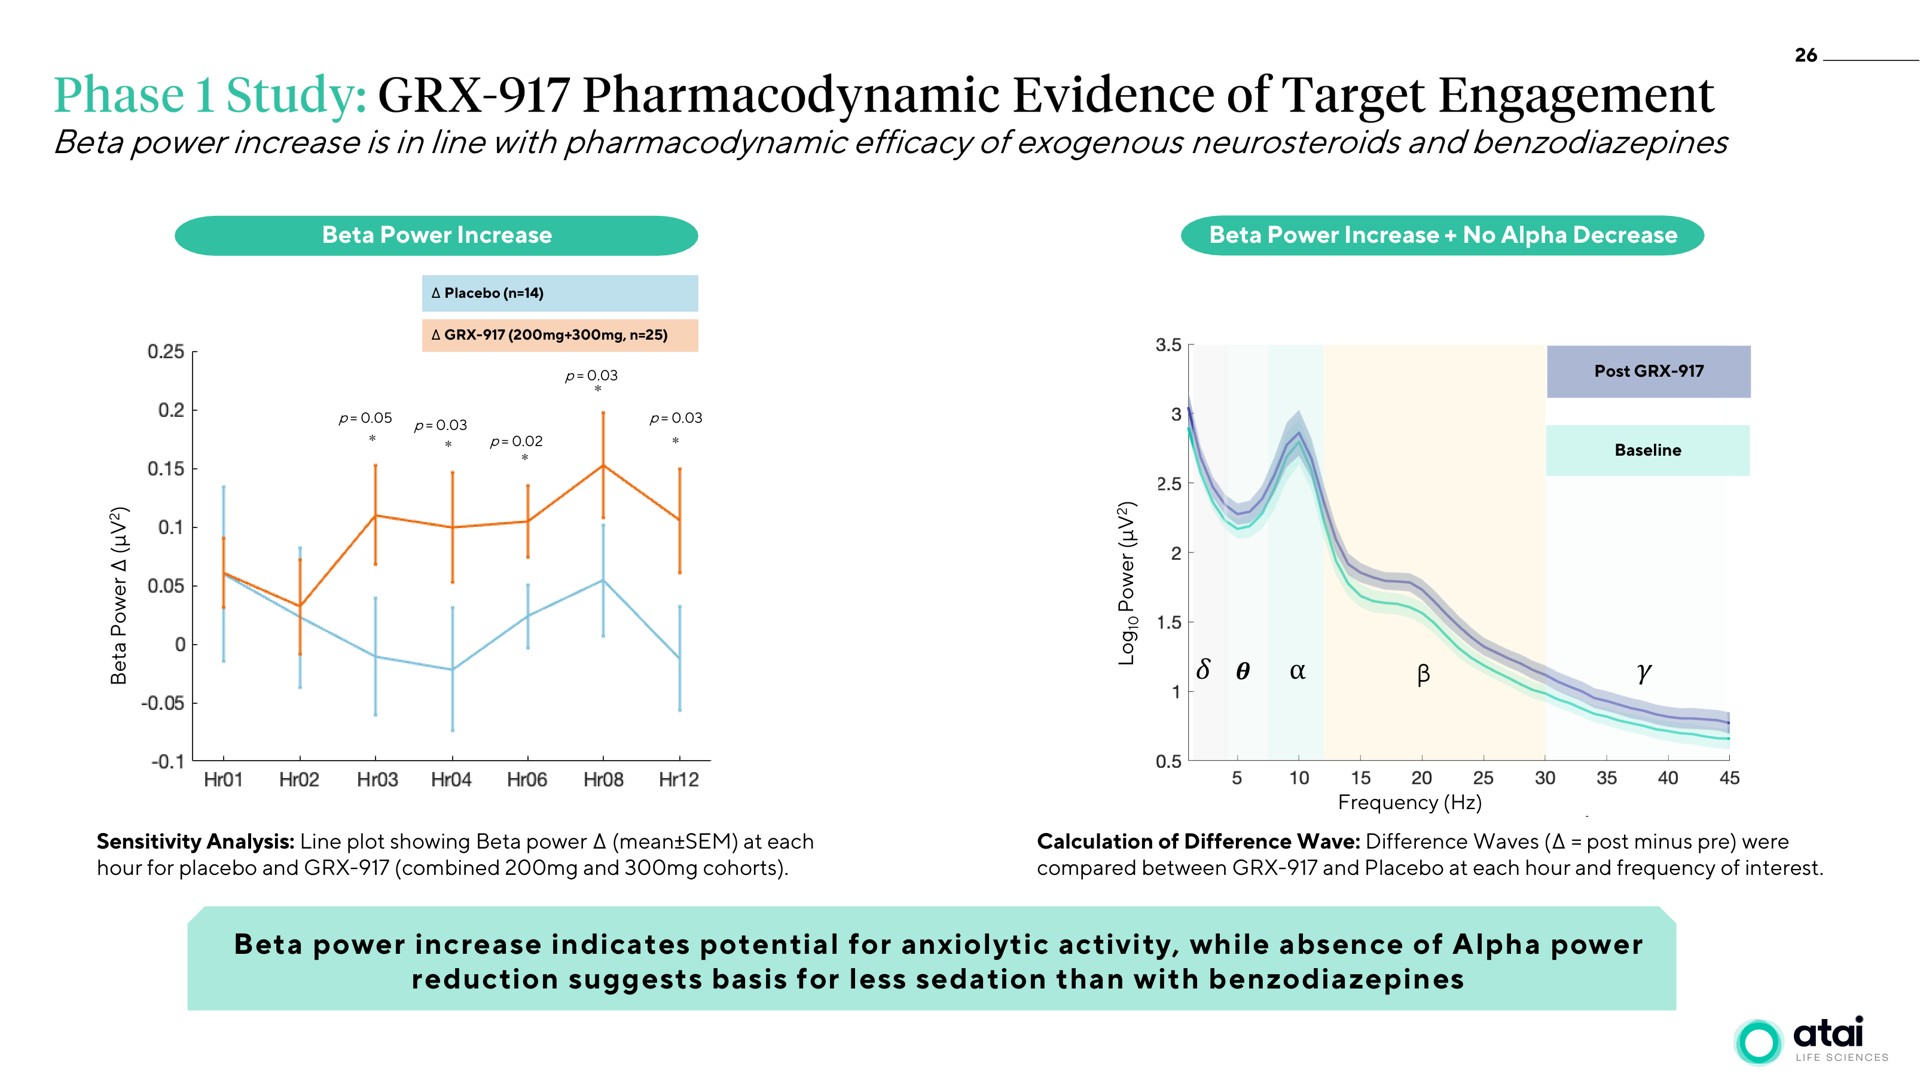 beta power increase is in line with pharmacodynamic efficacy of exogenous and phase study evidence target engagement | ATAI